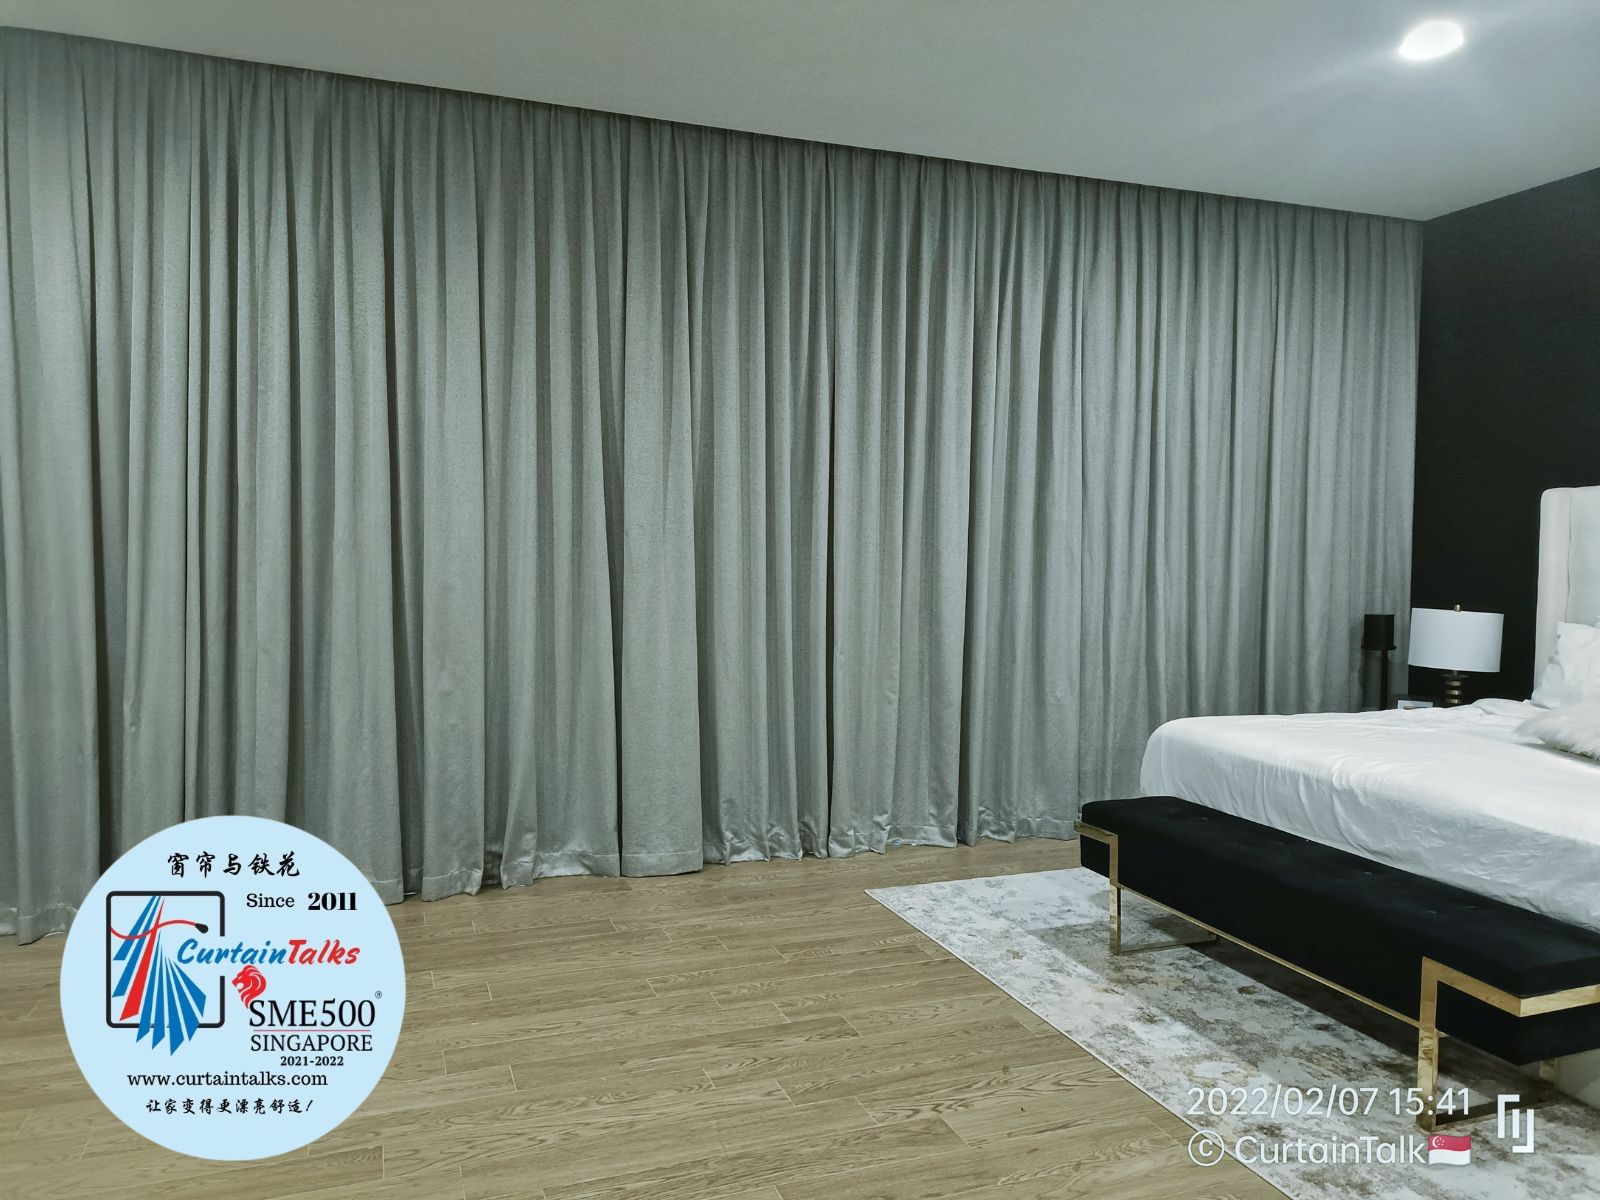 This is a Picture of Day and night curtain picture  for Singapore condo, Living hall, Day an dnight curtain, H2O condo